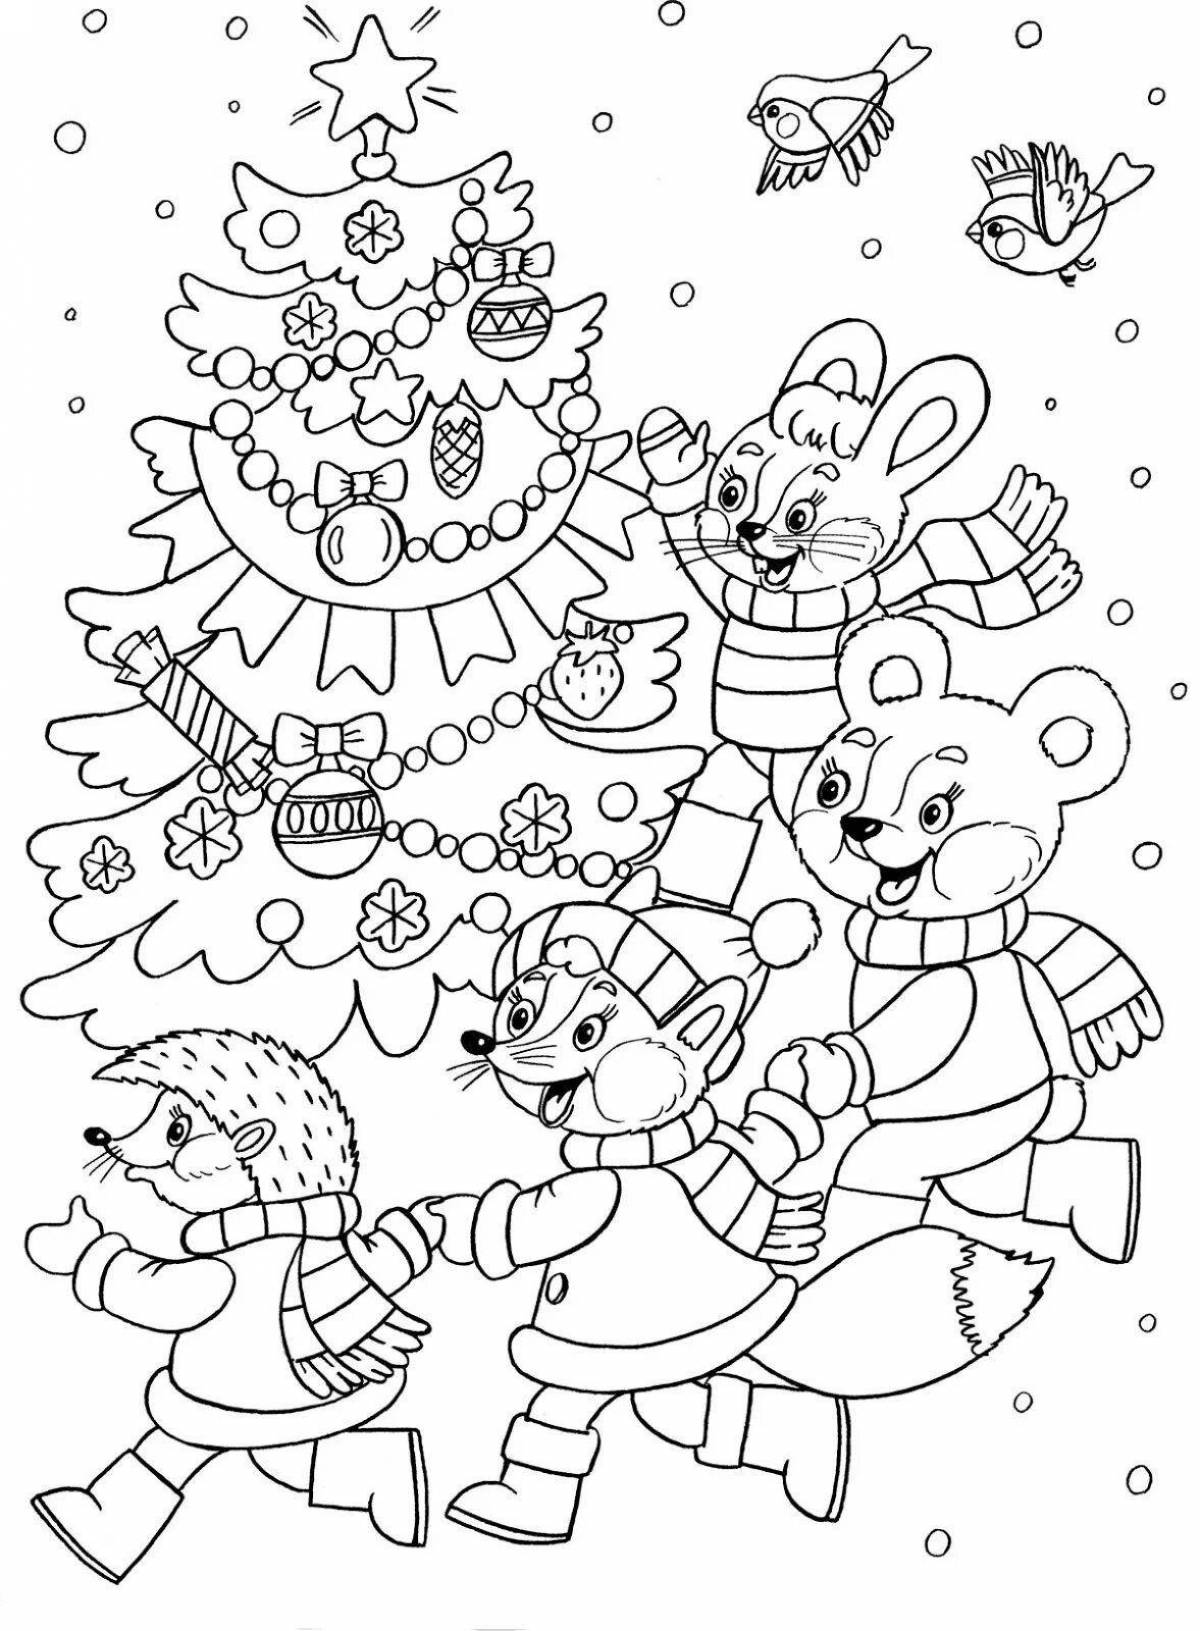 Joyful Christmas coloring book for children 8-9 years old